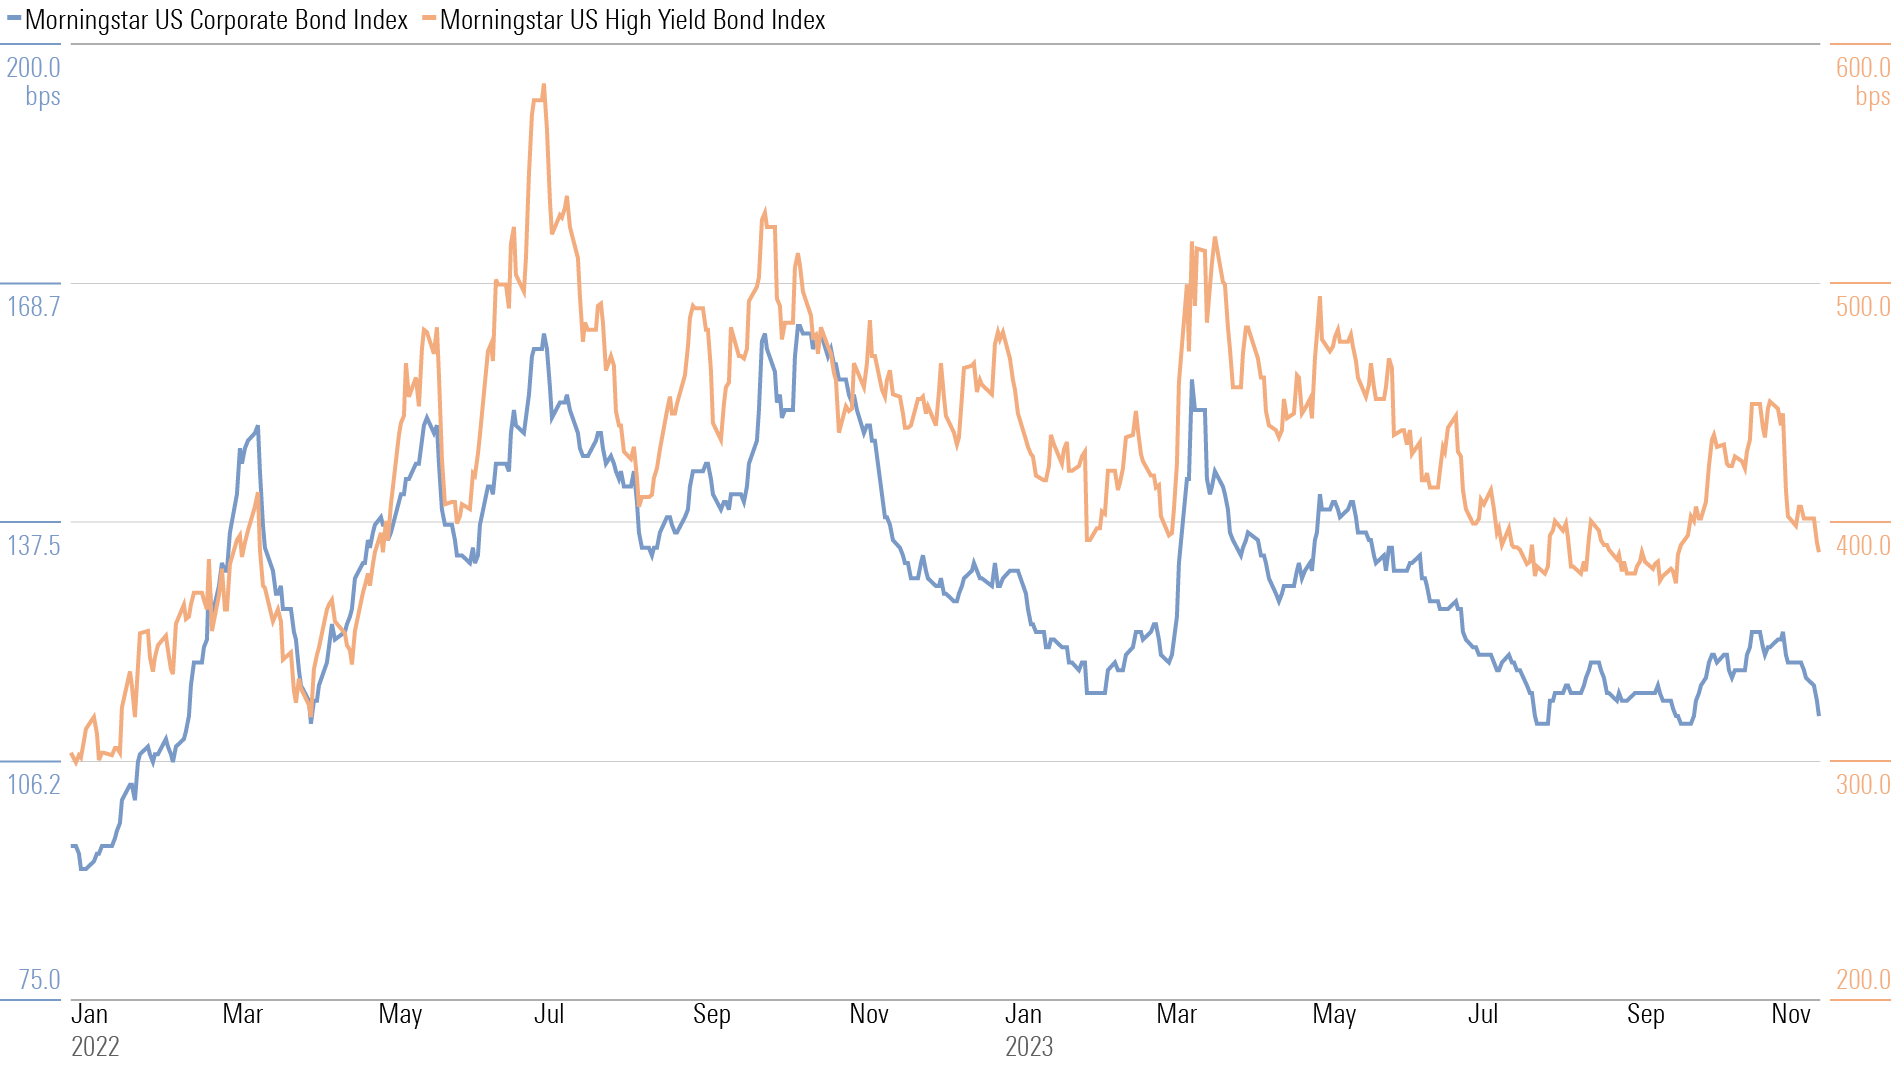 Line chart showing the spread of the Morningstar US Corporate Bond and Morningstar US High Yield Bond Indexes from 2013 through November 15, 2023.